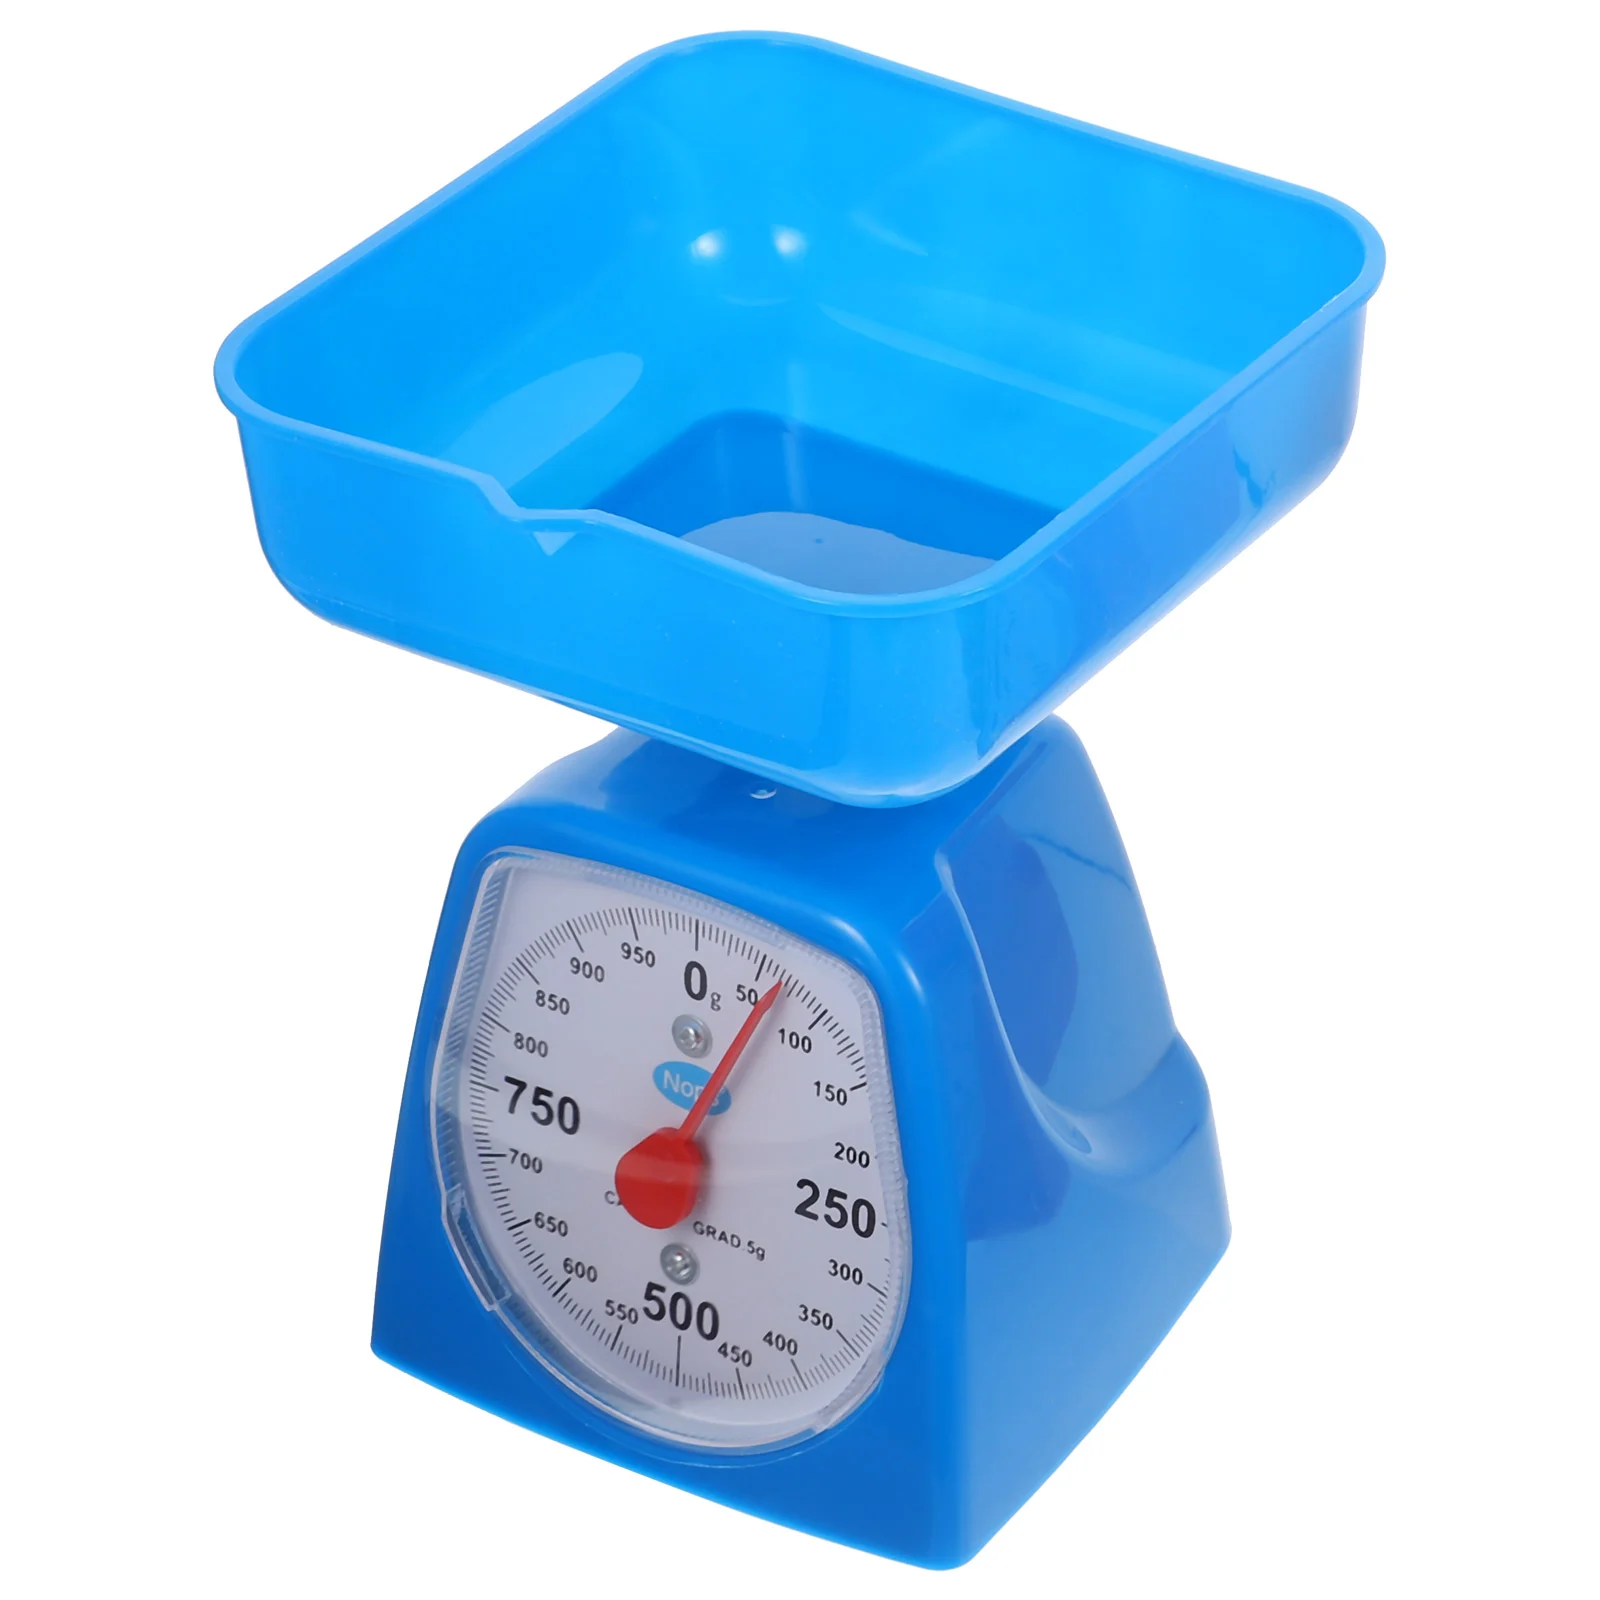 

Multifunction Spring Dial Scale Child Mechanic Tools Baking Pastry Plastic House